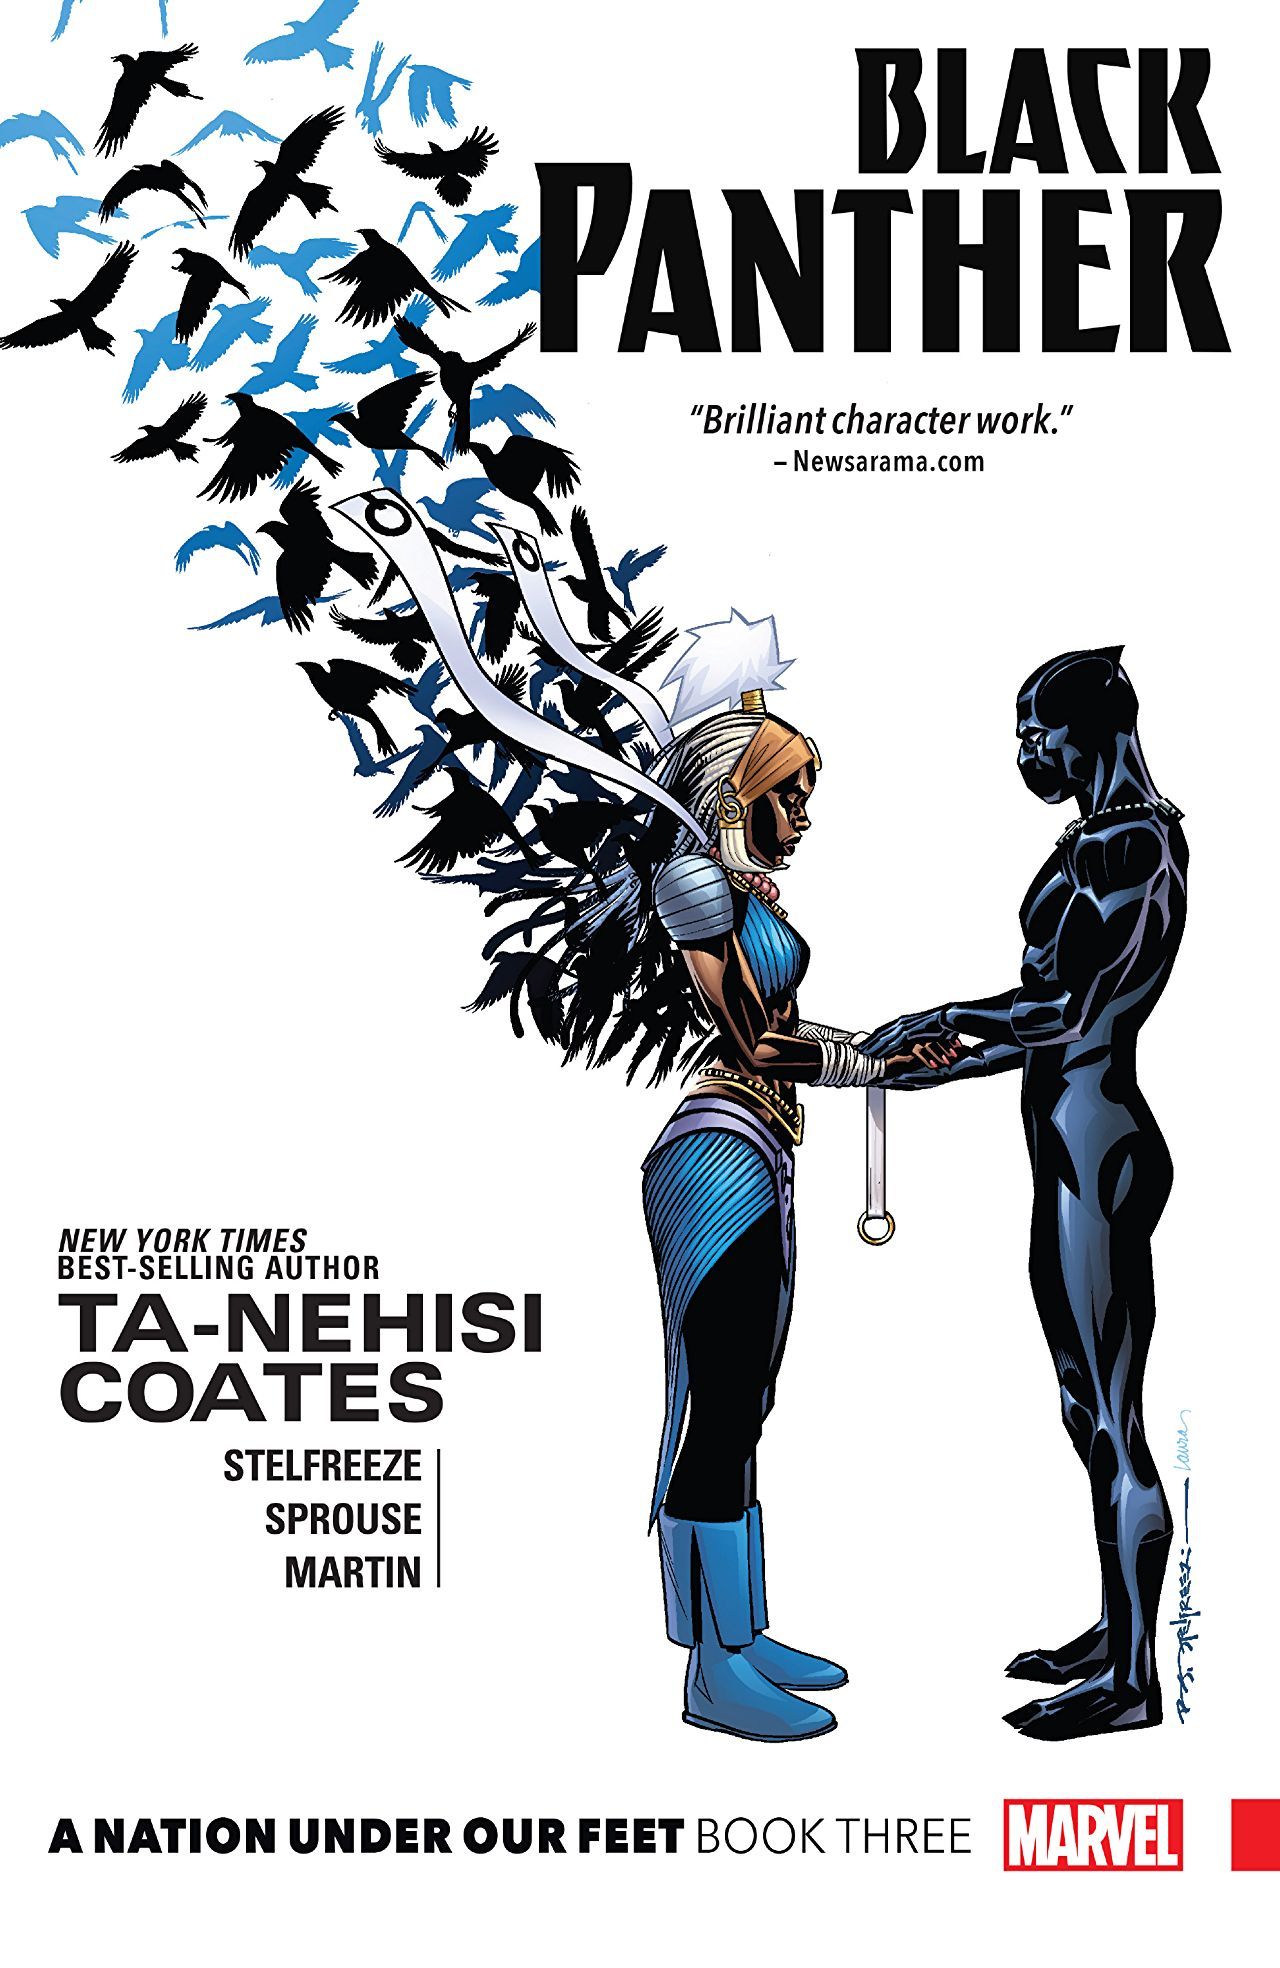 Black Panther, Vol. 3: A Nation Under Our Feet by Ta-Nehisi Coates